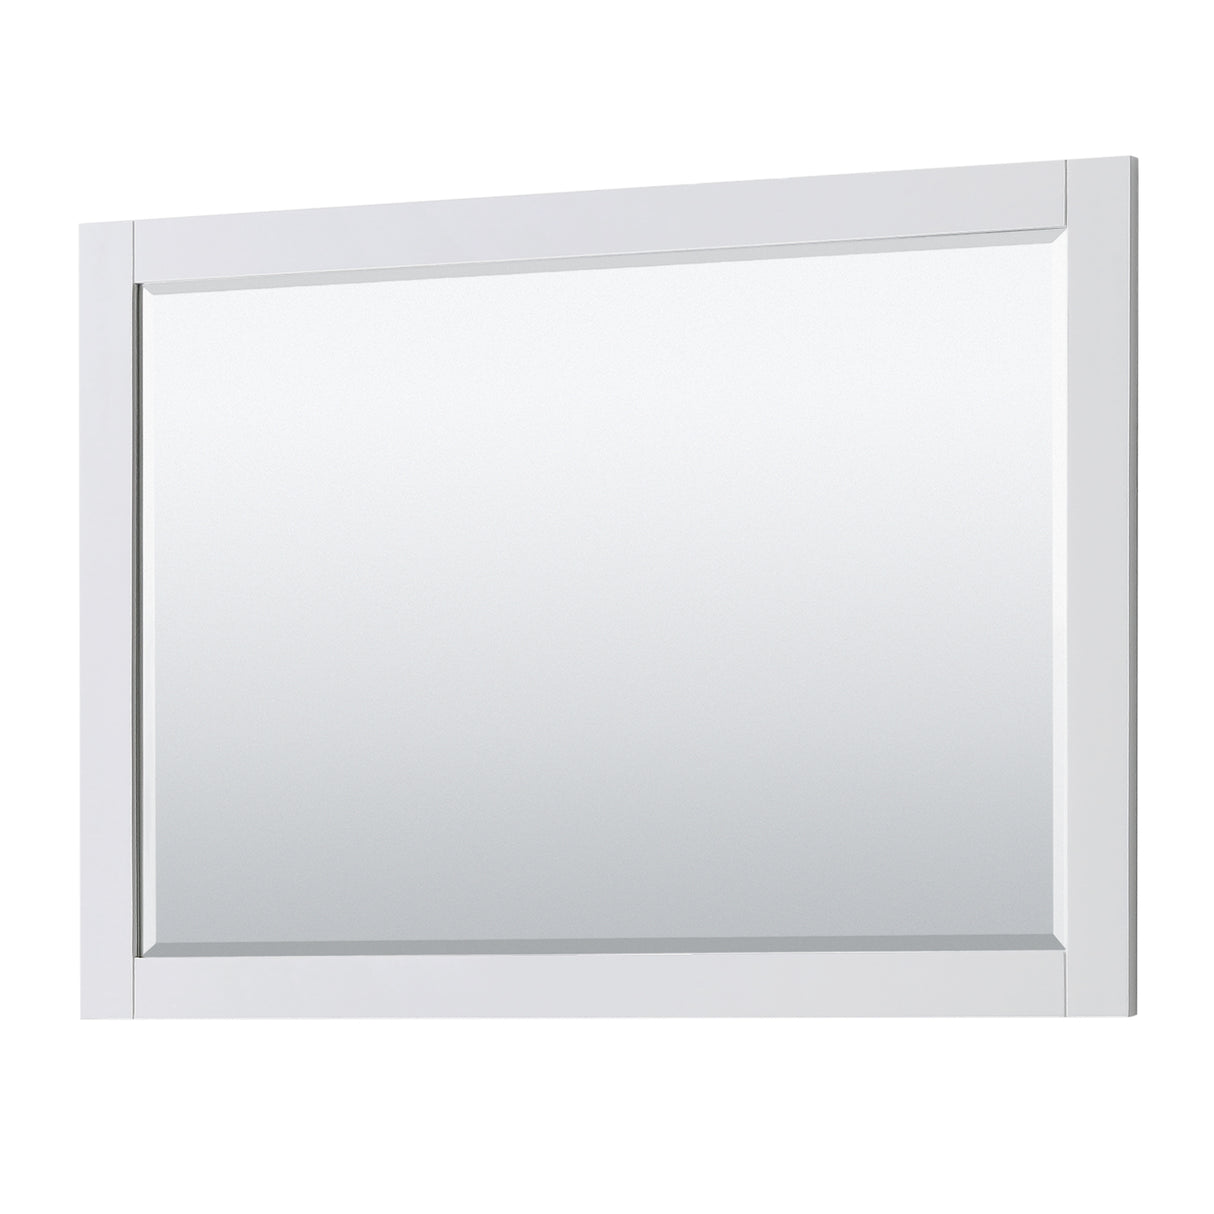 Avery 48 Inch Double Bathroom Vanity in White Carrara Cultured Marble Countertop Undermount Square Sinks 46 Inch Mirror